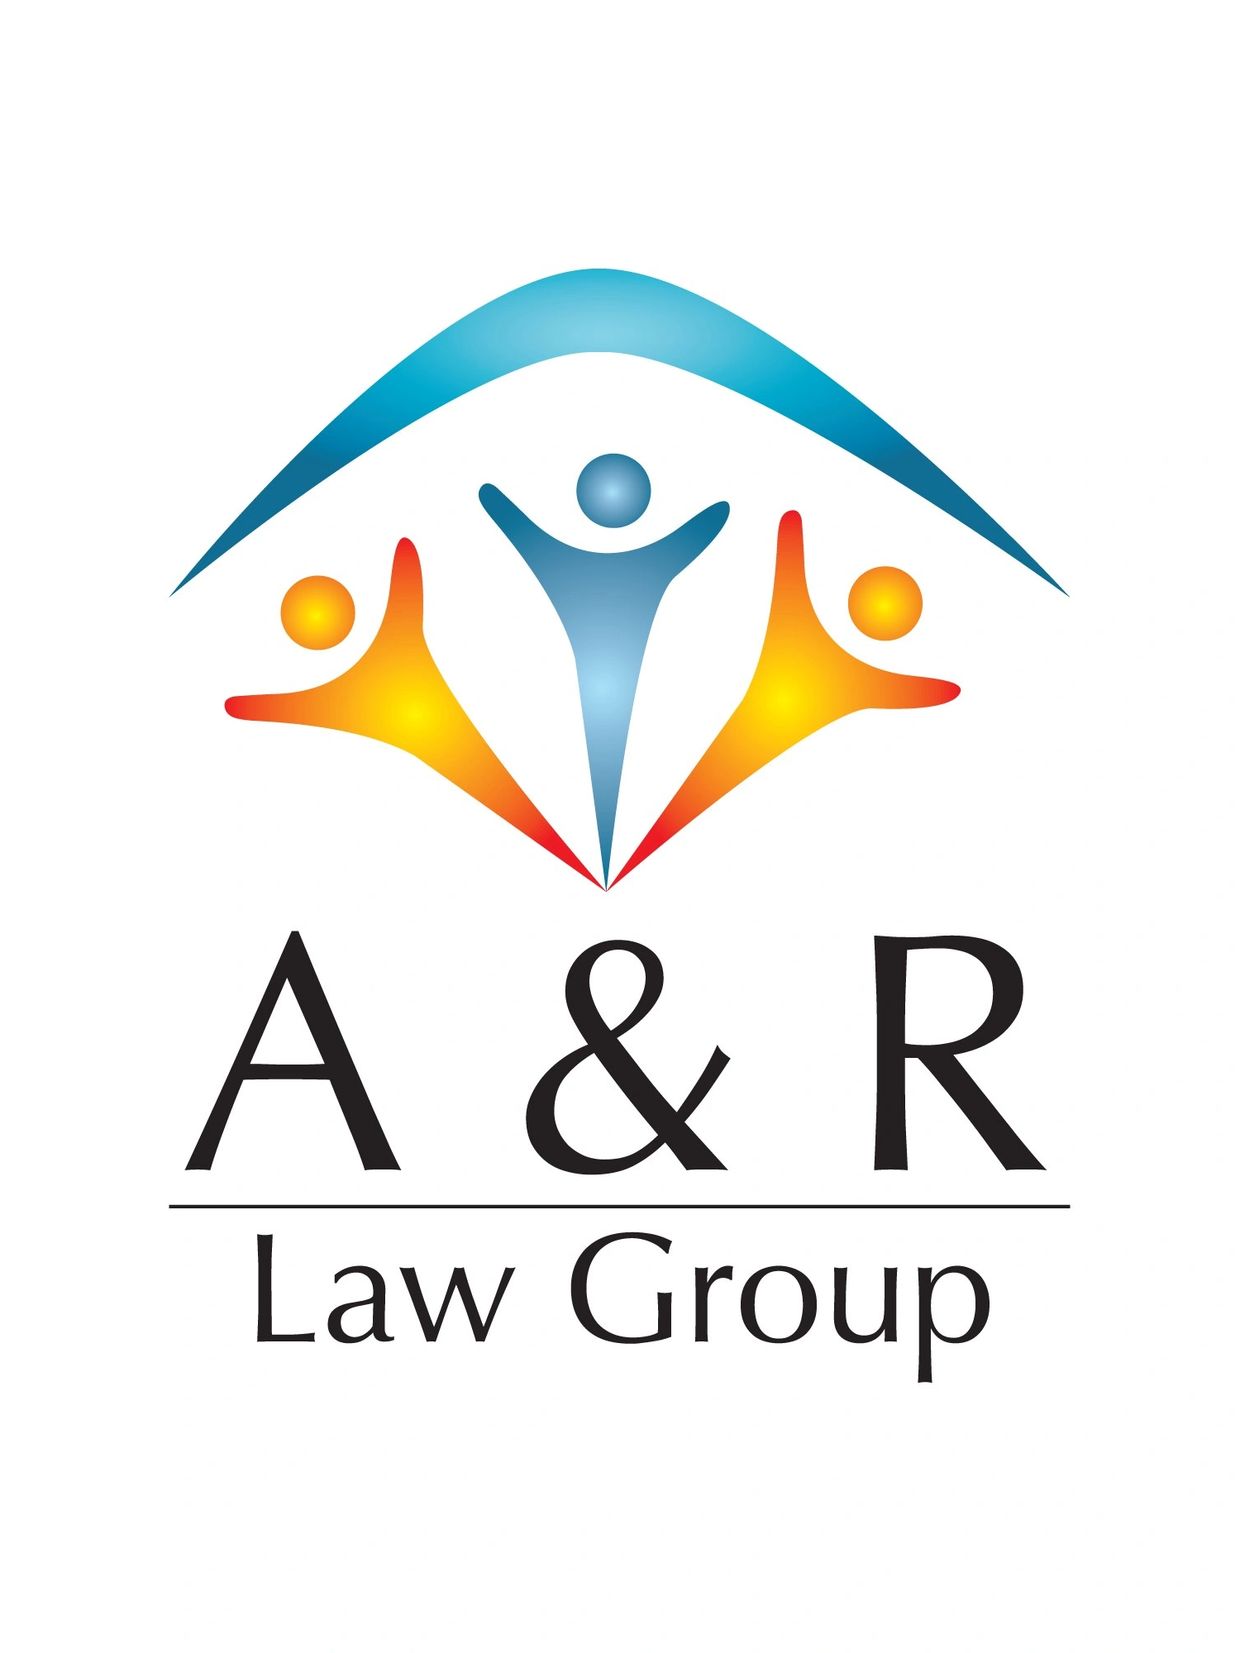 Company logo. Silhouette of 2 orange & 1 blue people with arms outstretched under blue A shape